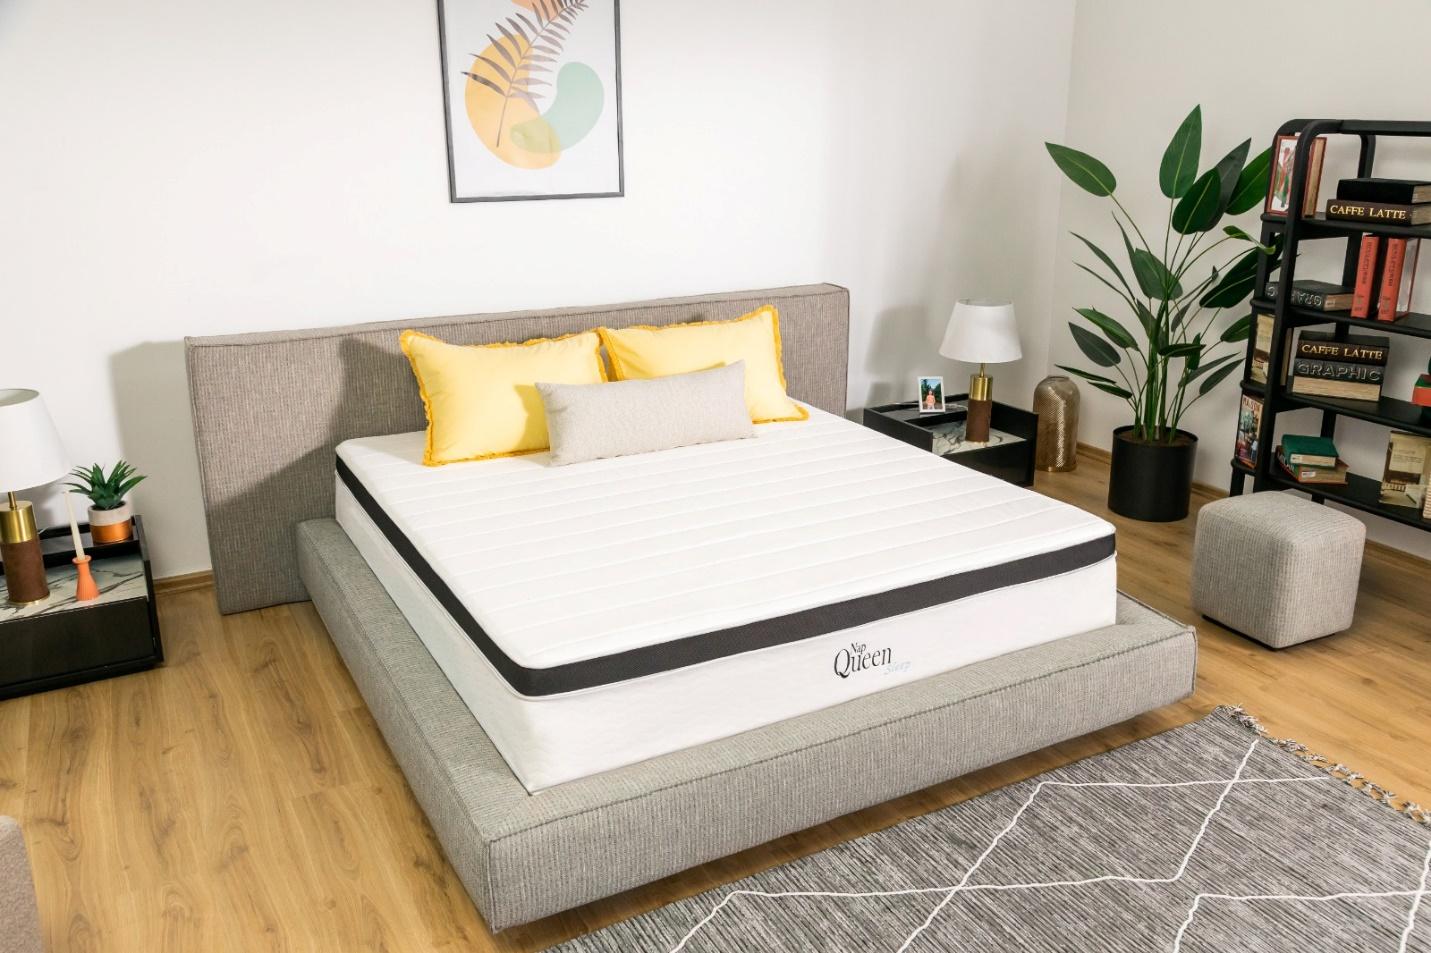 Nap Queen Maxima Hybrid Mattresses Recalled by Adven Group Due to Fire Hazard; Violation of Federal Flammability Standard thumbnail